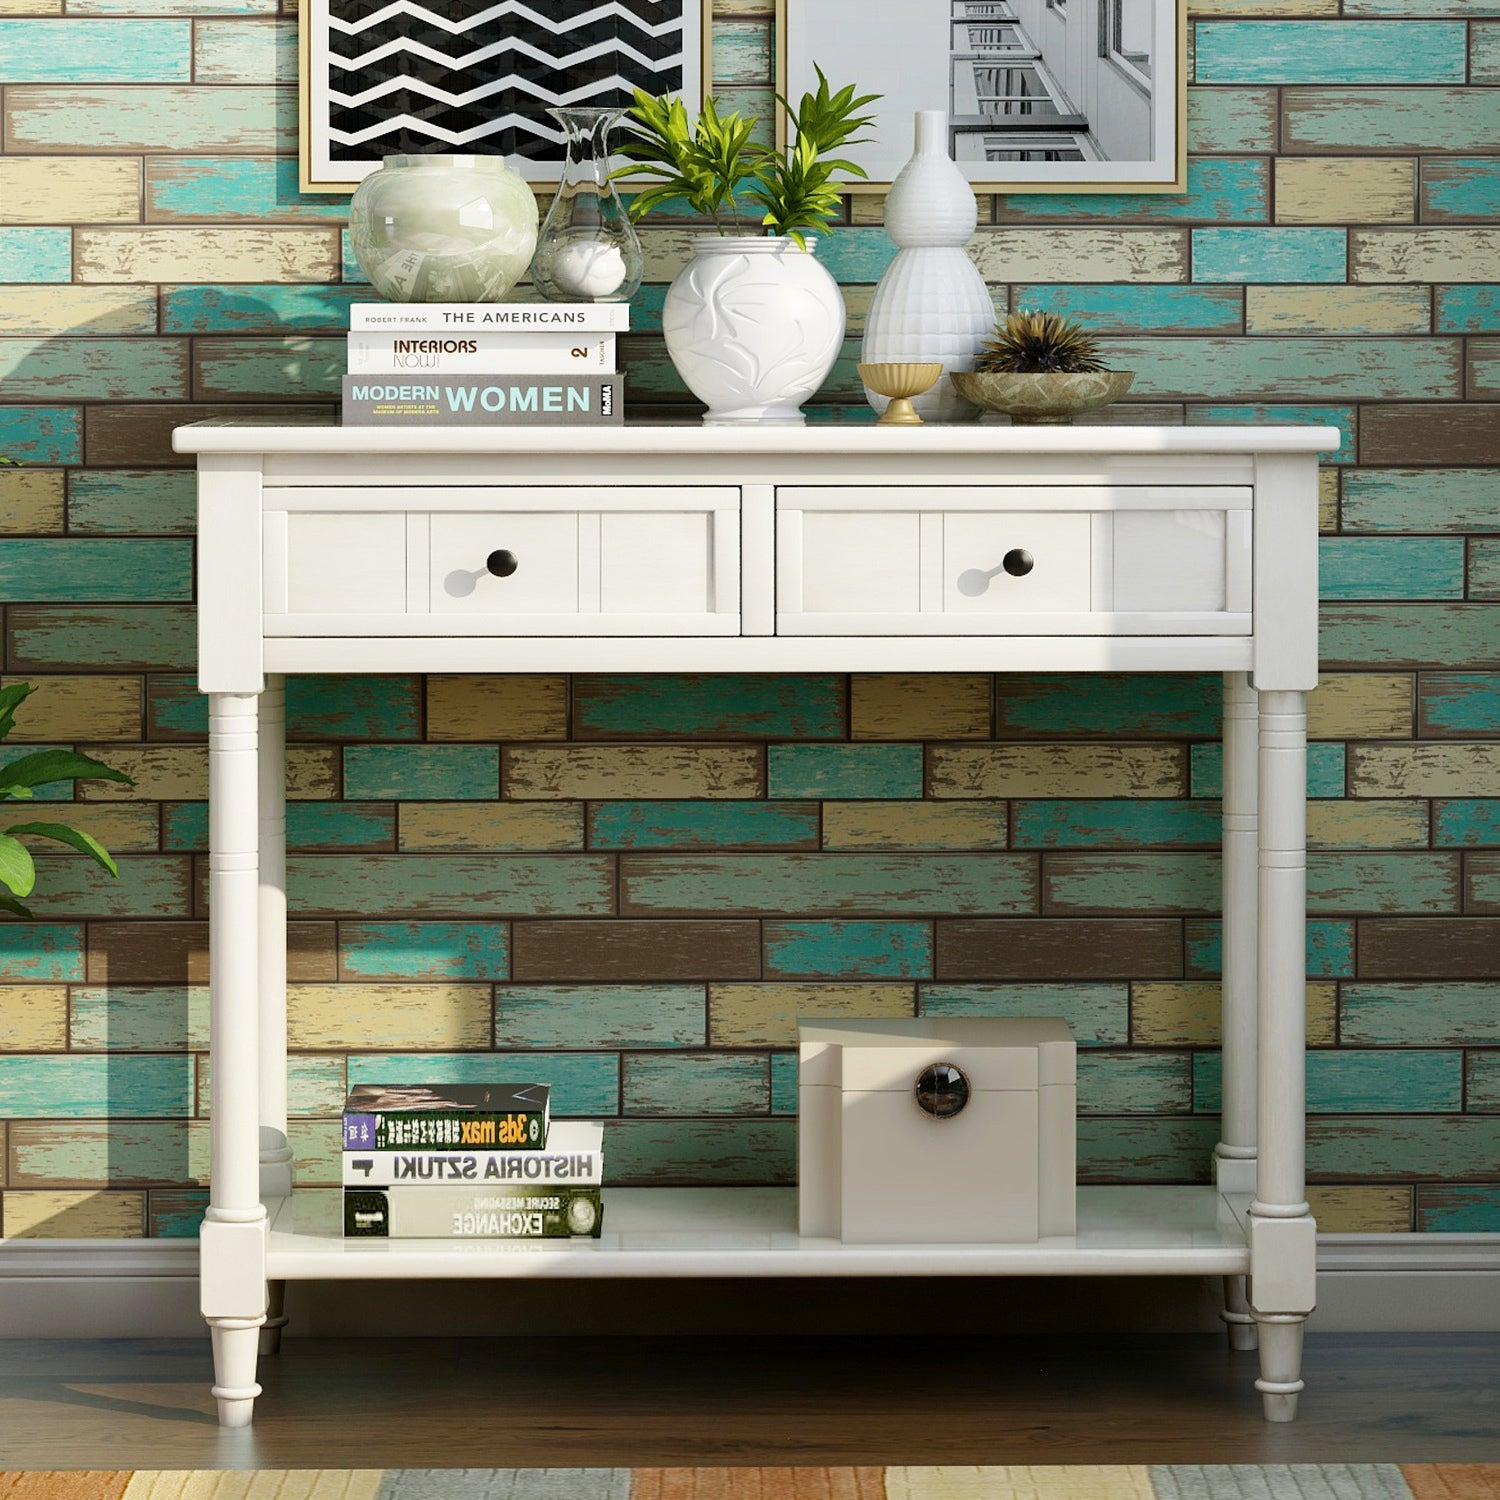 TREXM Daisy Series Console Table Traditional Design with Two Drawers and Bottom Shelf (Ivory White)